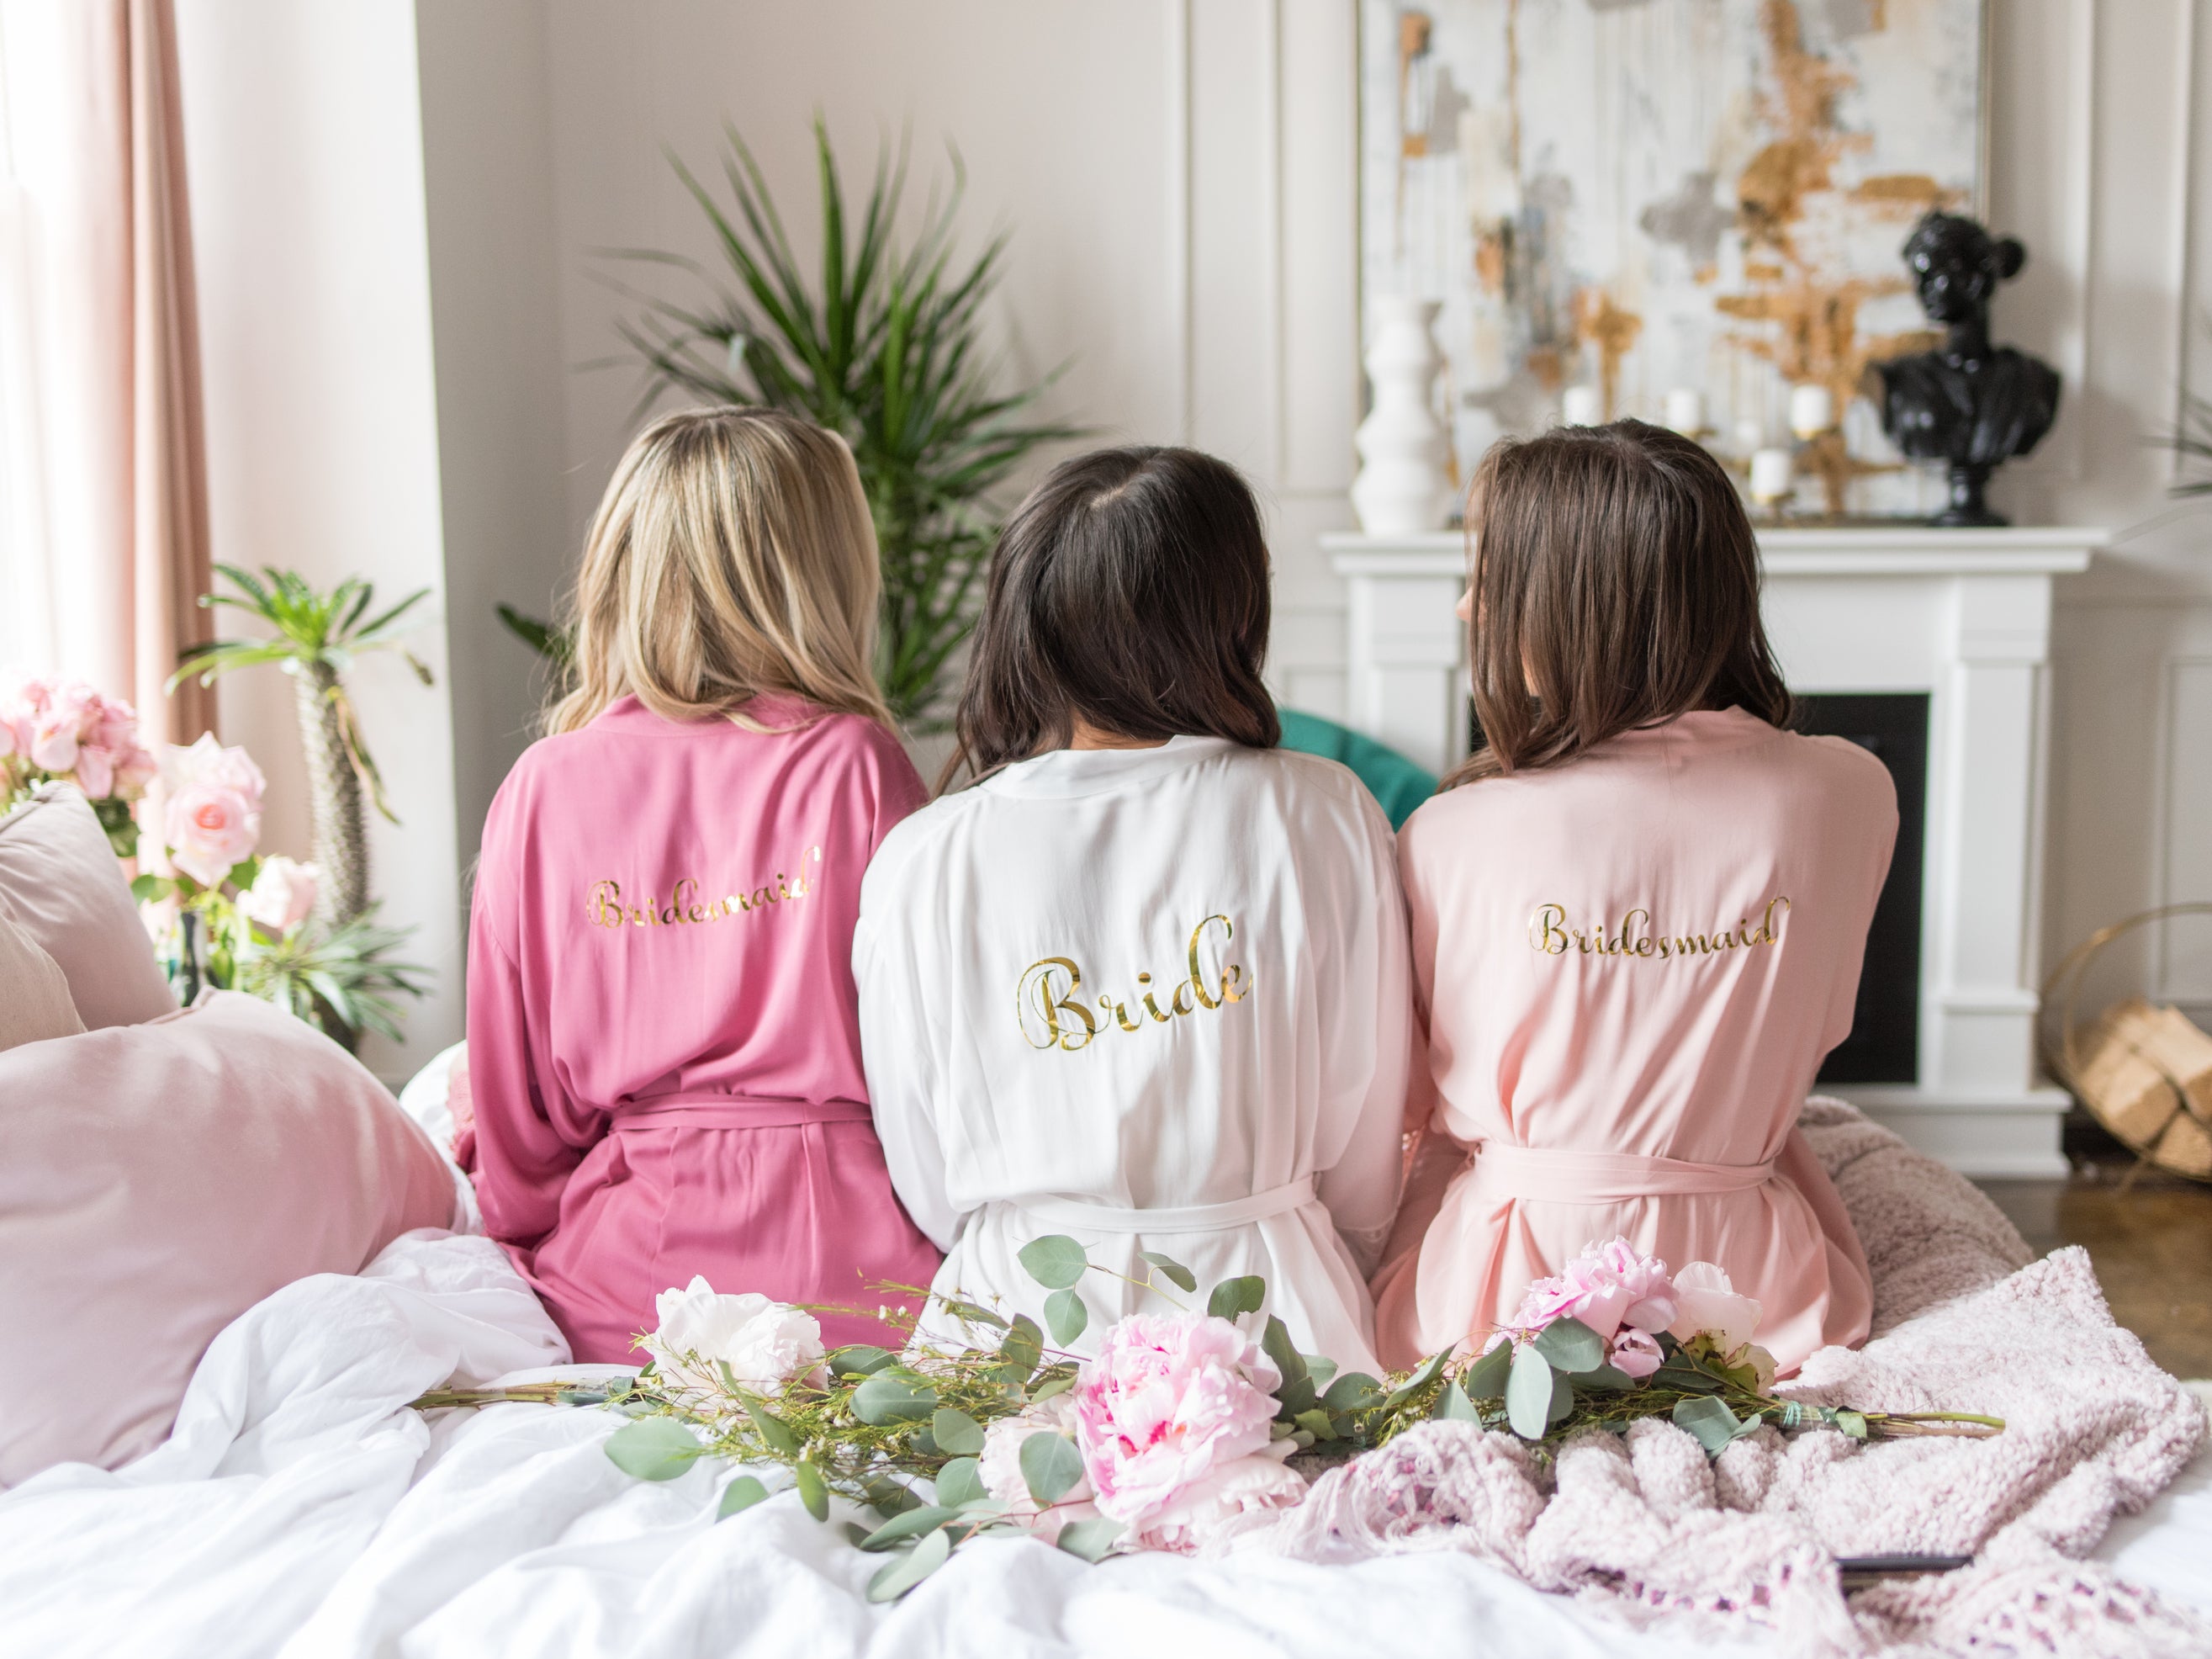 Satin Bridesmaid Robes - Three beautiful models dressed in white, blush and pink satin bridesmaid robes with monogram design in preparation for a bachelorette party, wedding or any fun occasion.